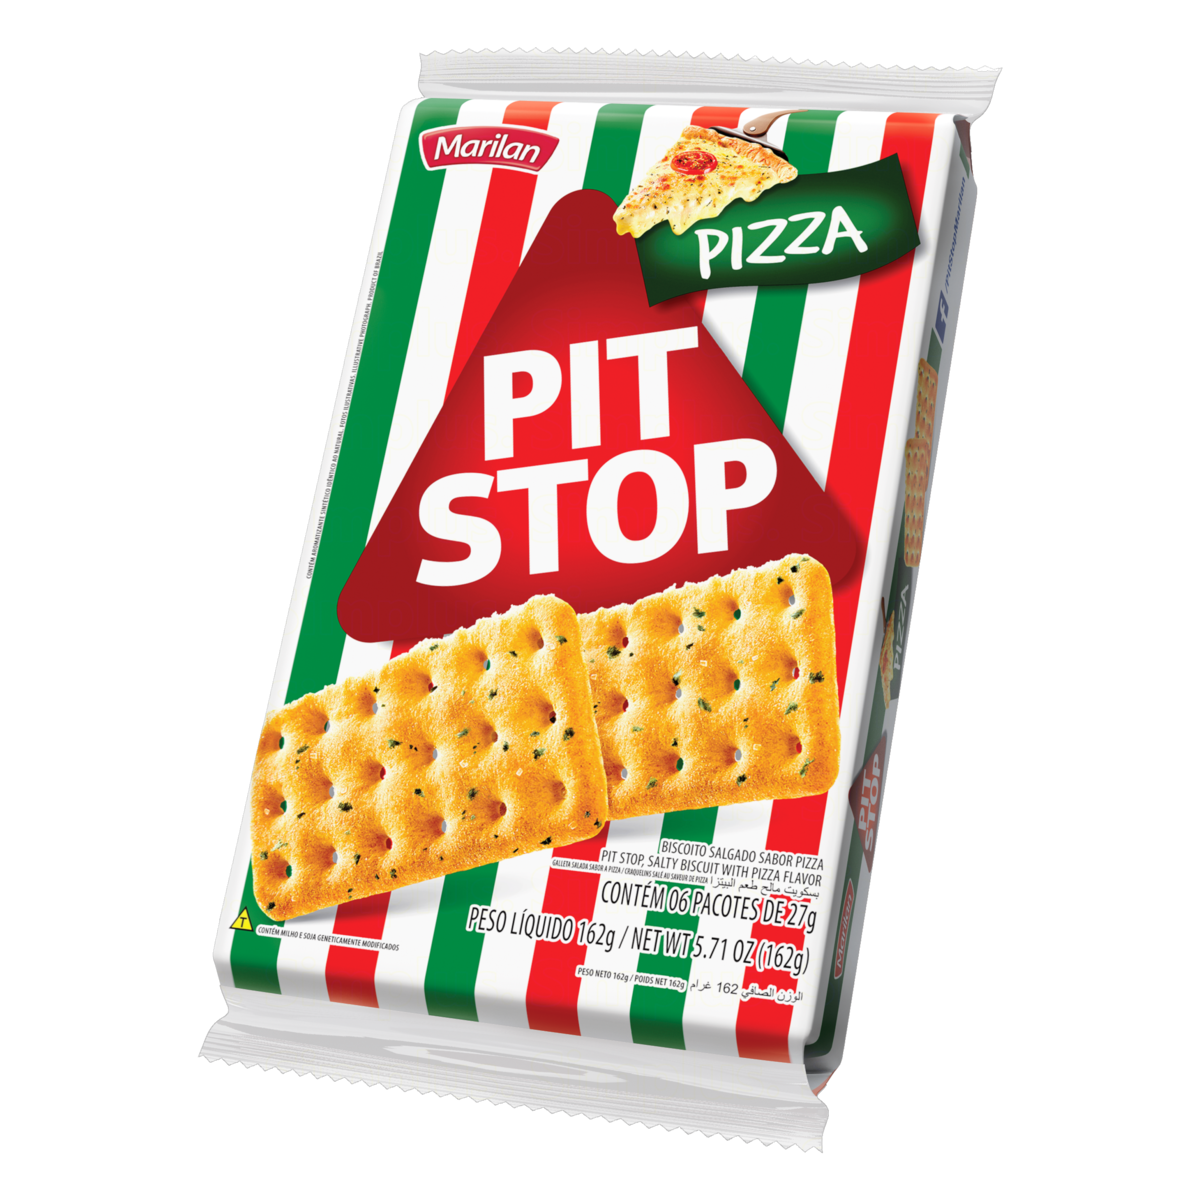 7896003702873 - PACK BISCOITO PIZZA MARILAN PIT STOP PACOTE 162G 6 UNIDADES